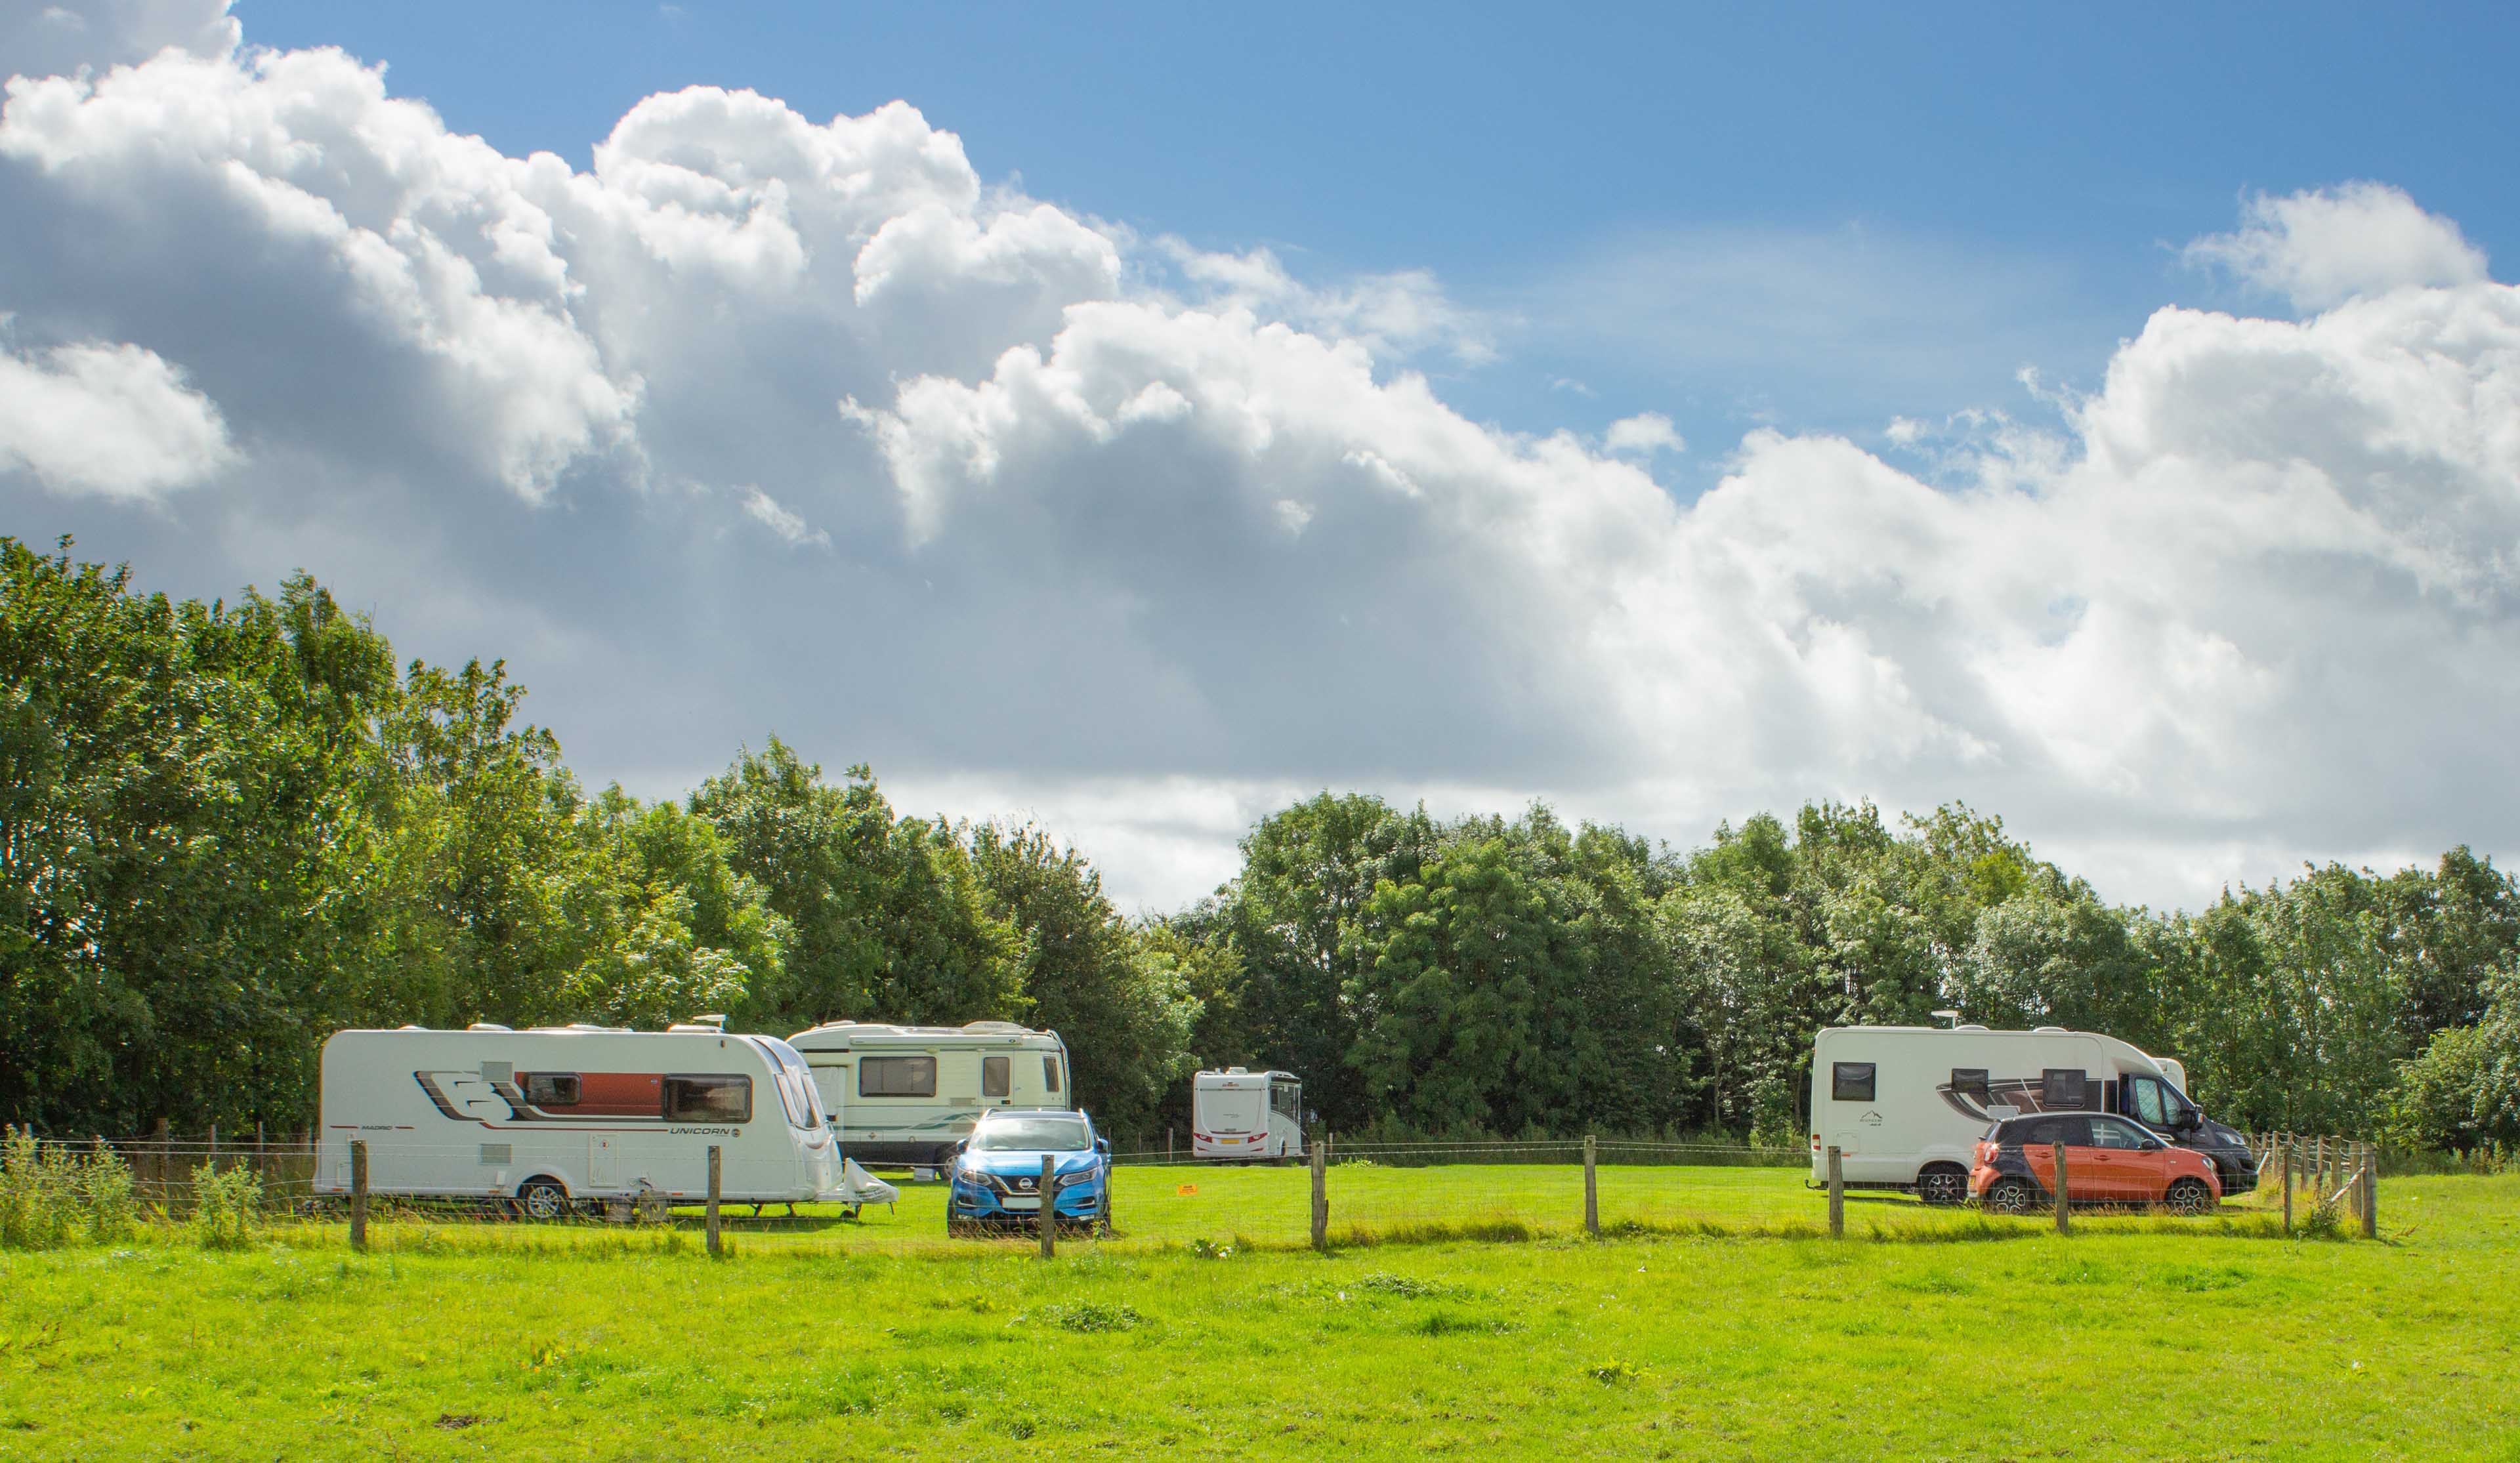 The view up the lawn finished Church Farm Caravan and Motorhome site providing space for up to 5 caravans.